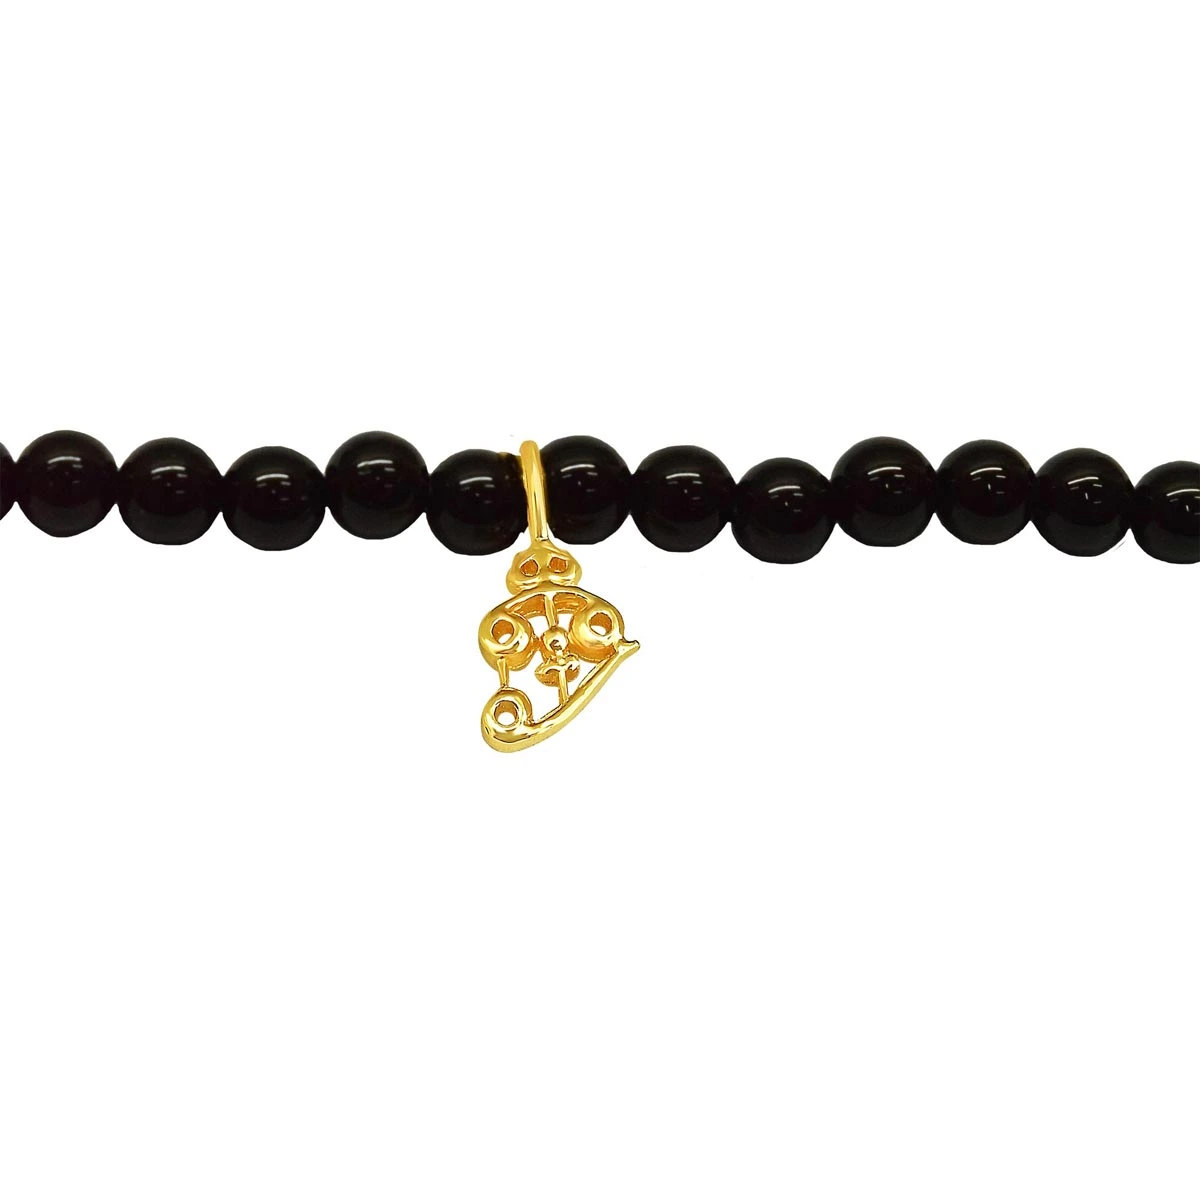 Gold Plated Sterling Silver Shiva's Trishul with Black Onyx Bracelet for Men and Women (SB69)